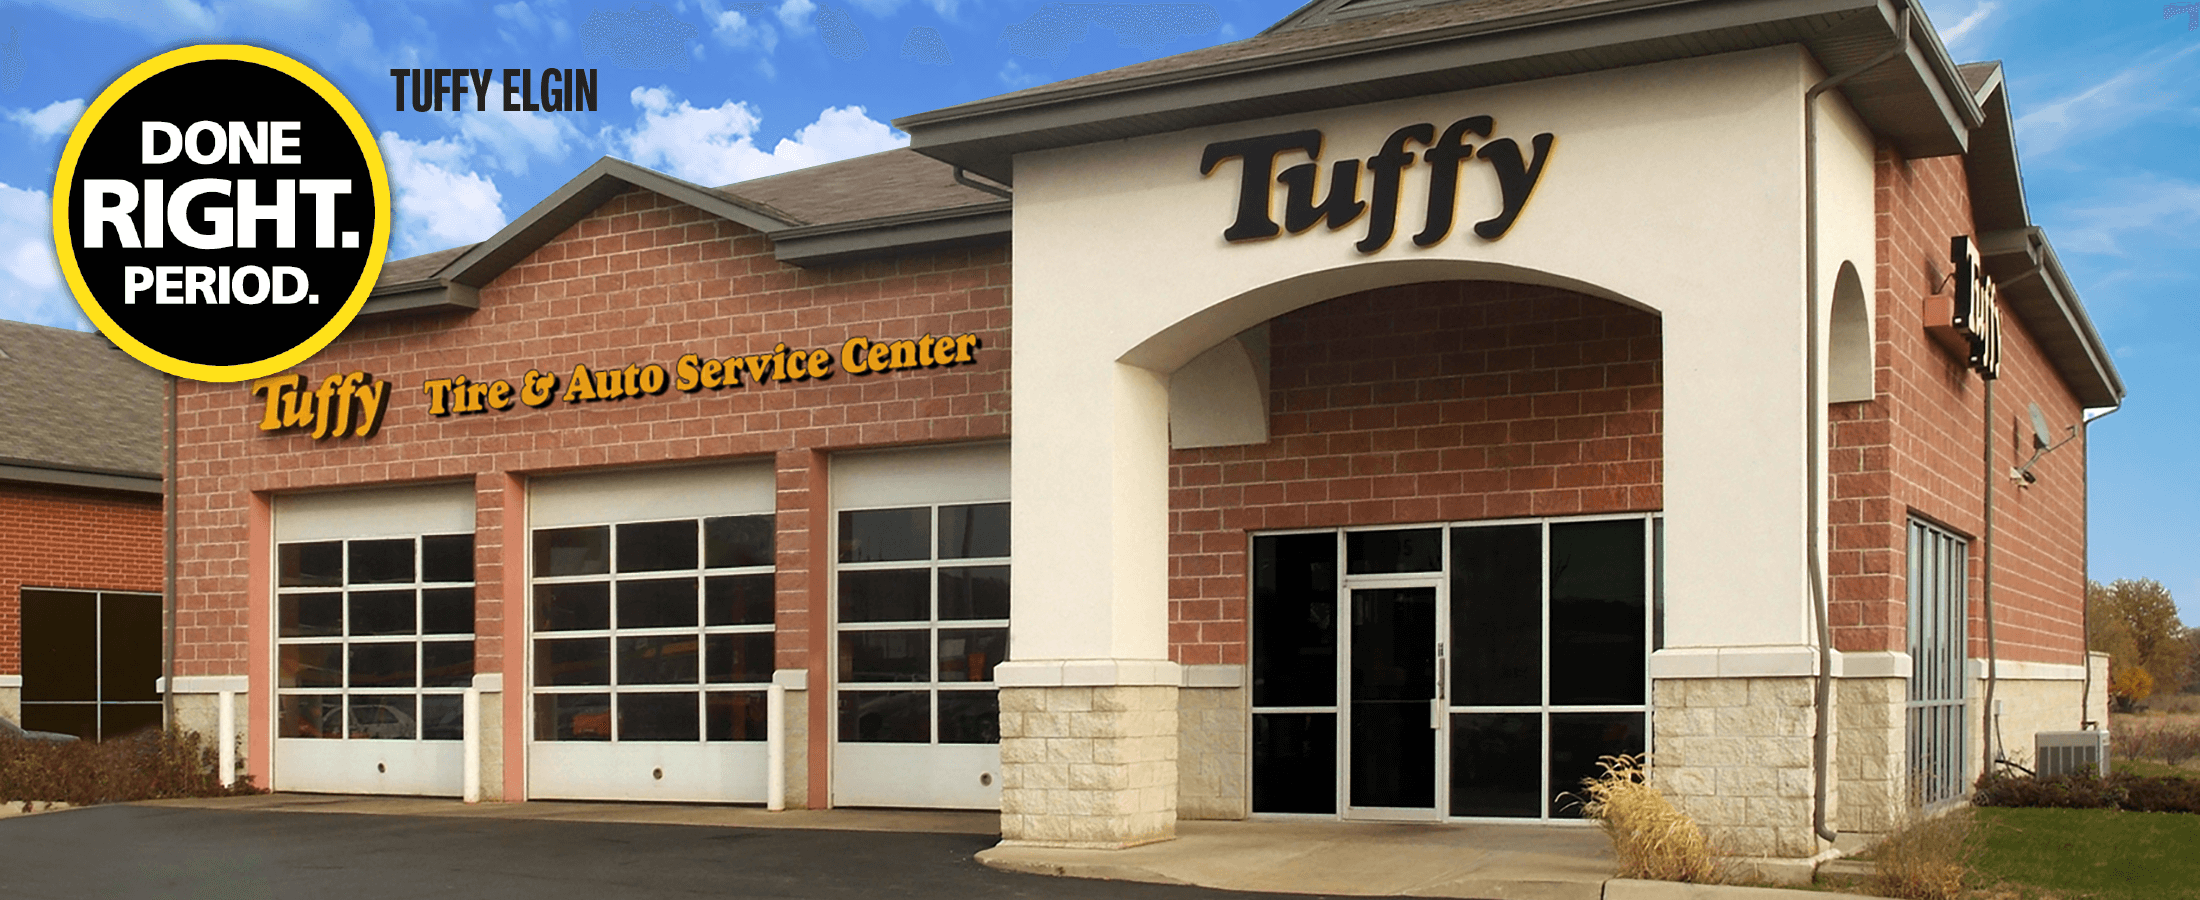 Own A Tire & Auto Repair Franchise with Tuffy Franchise